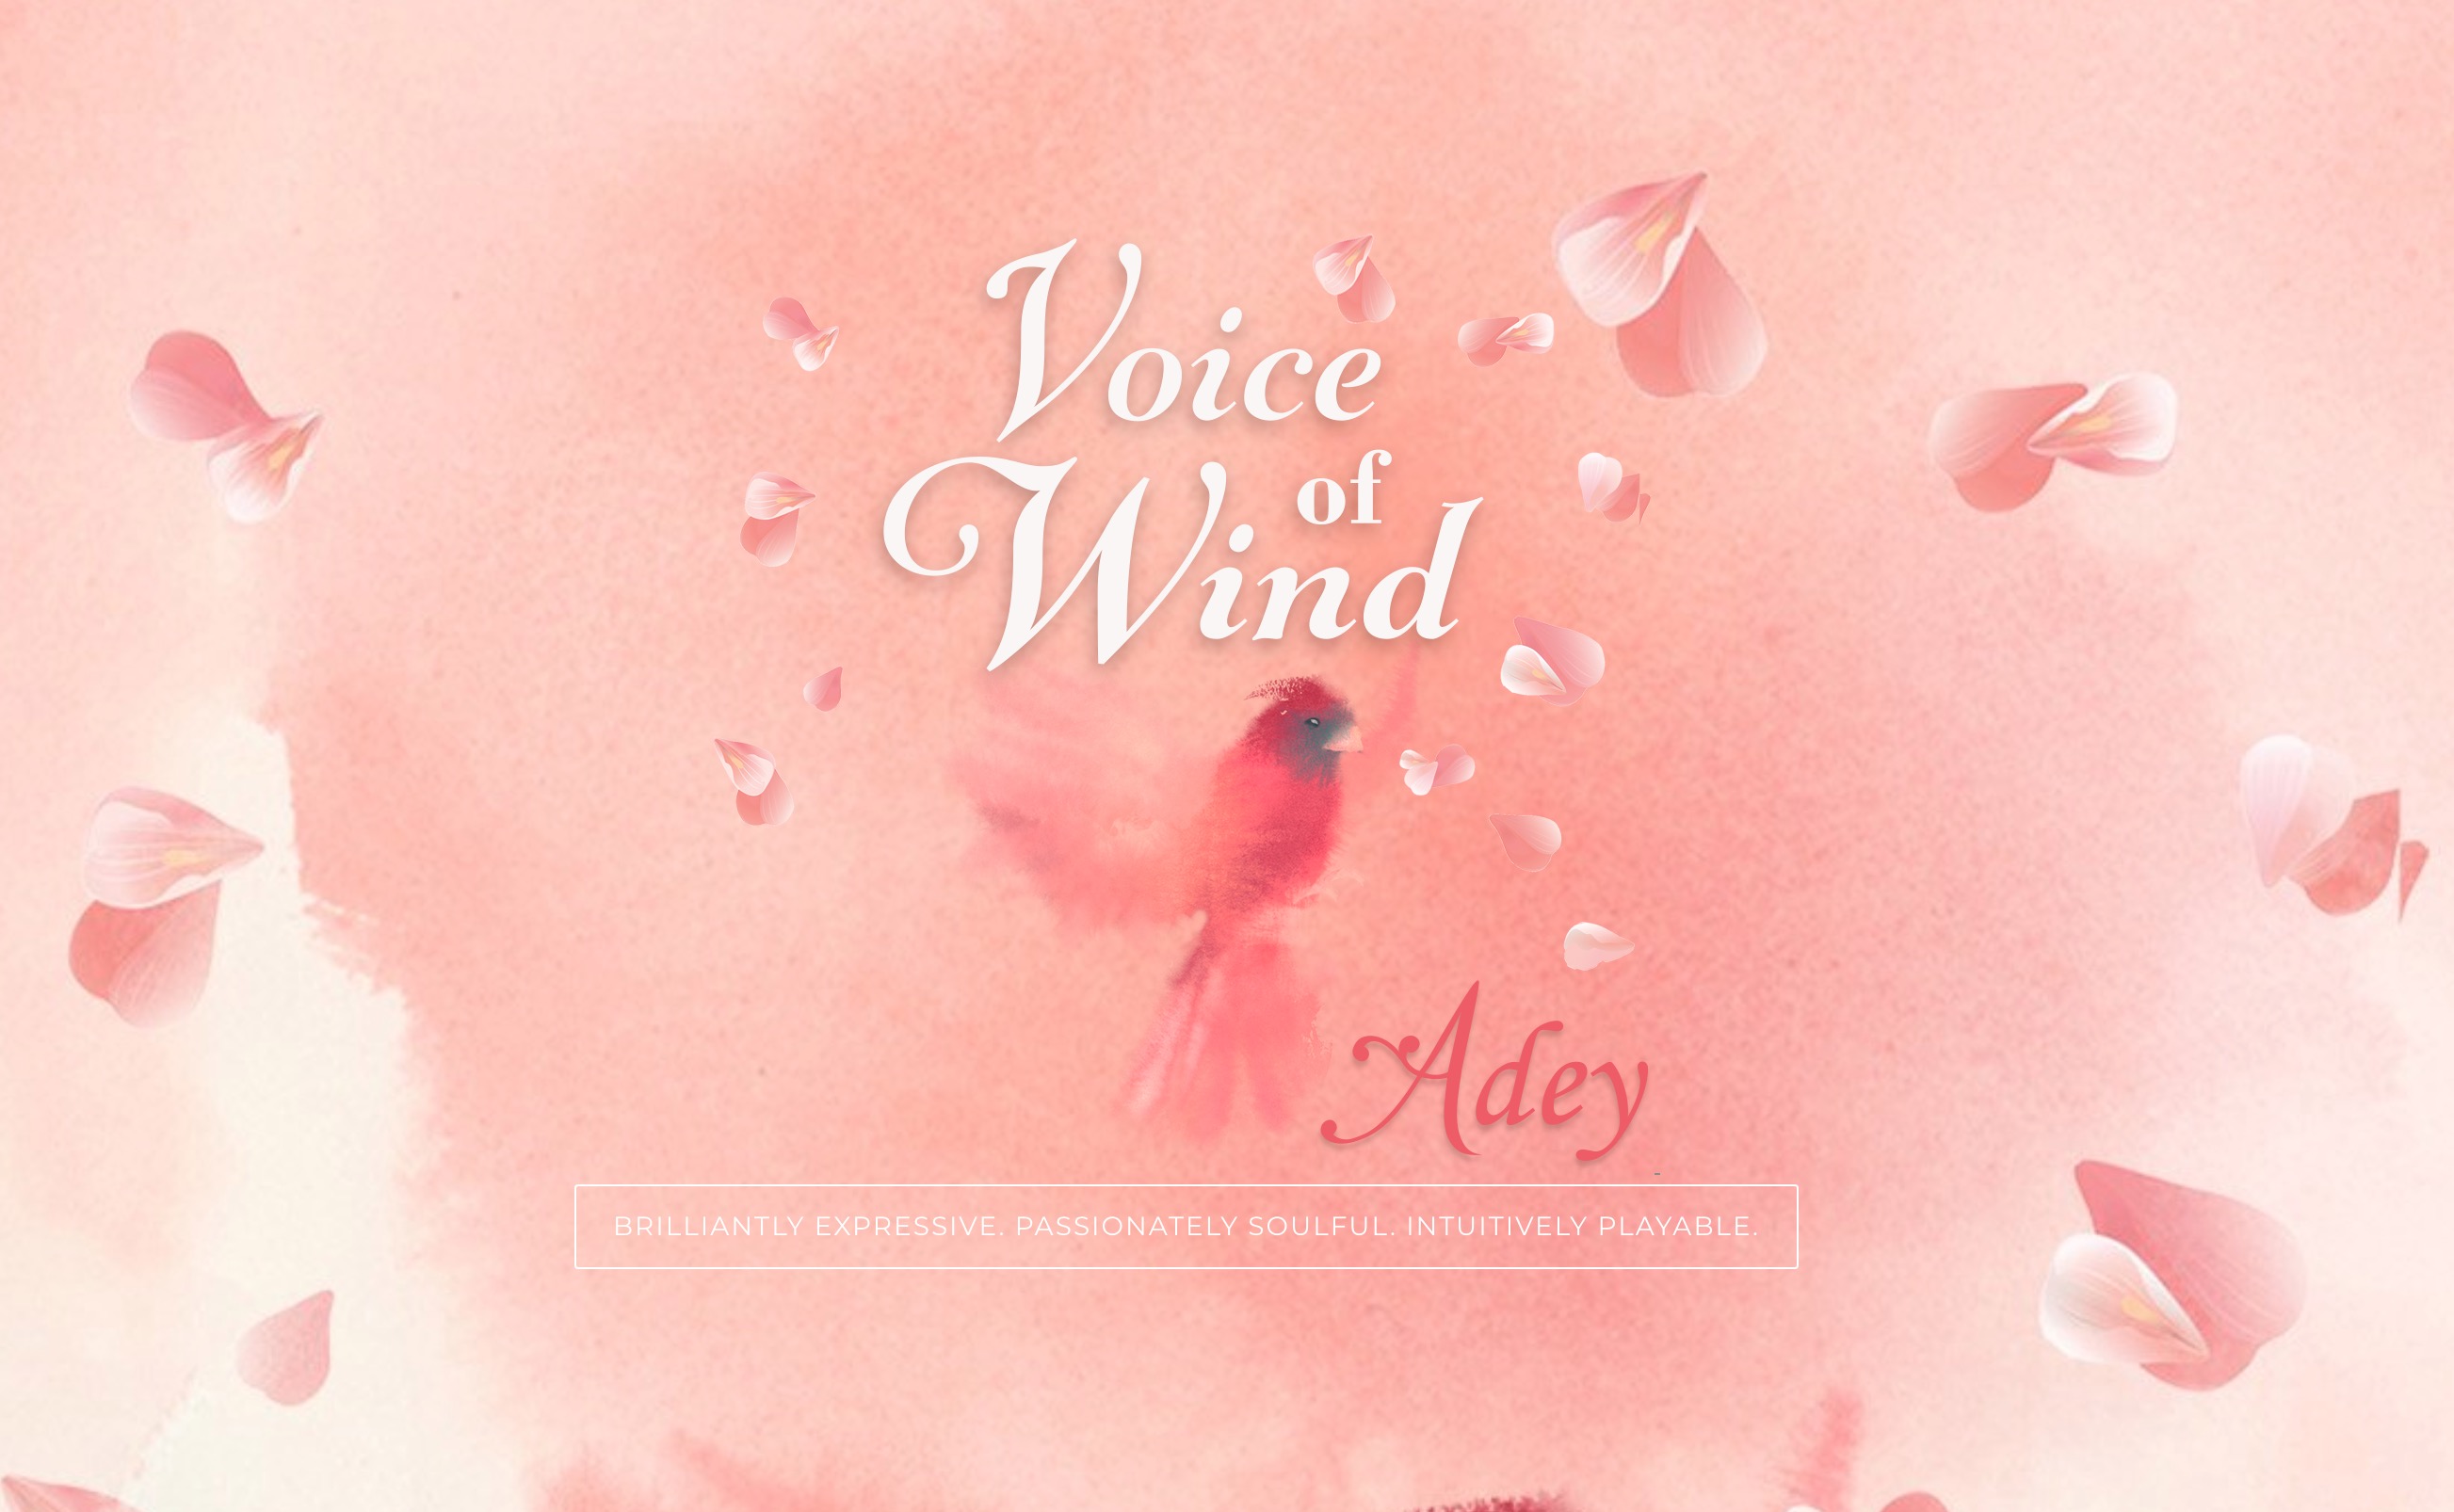 Voice of Wind: Adey by Soundiron Review